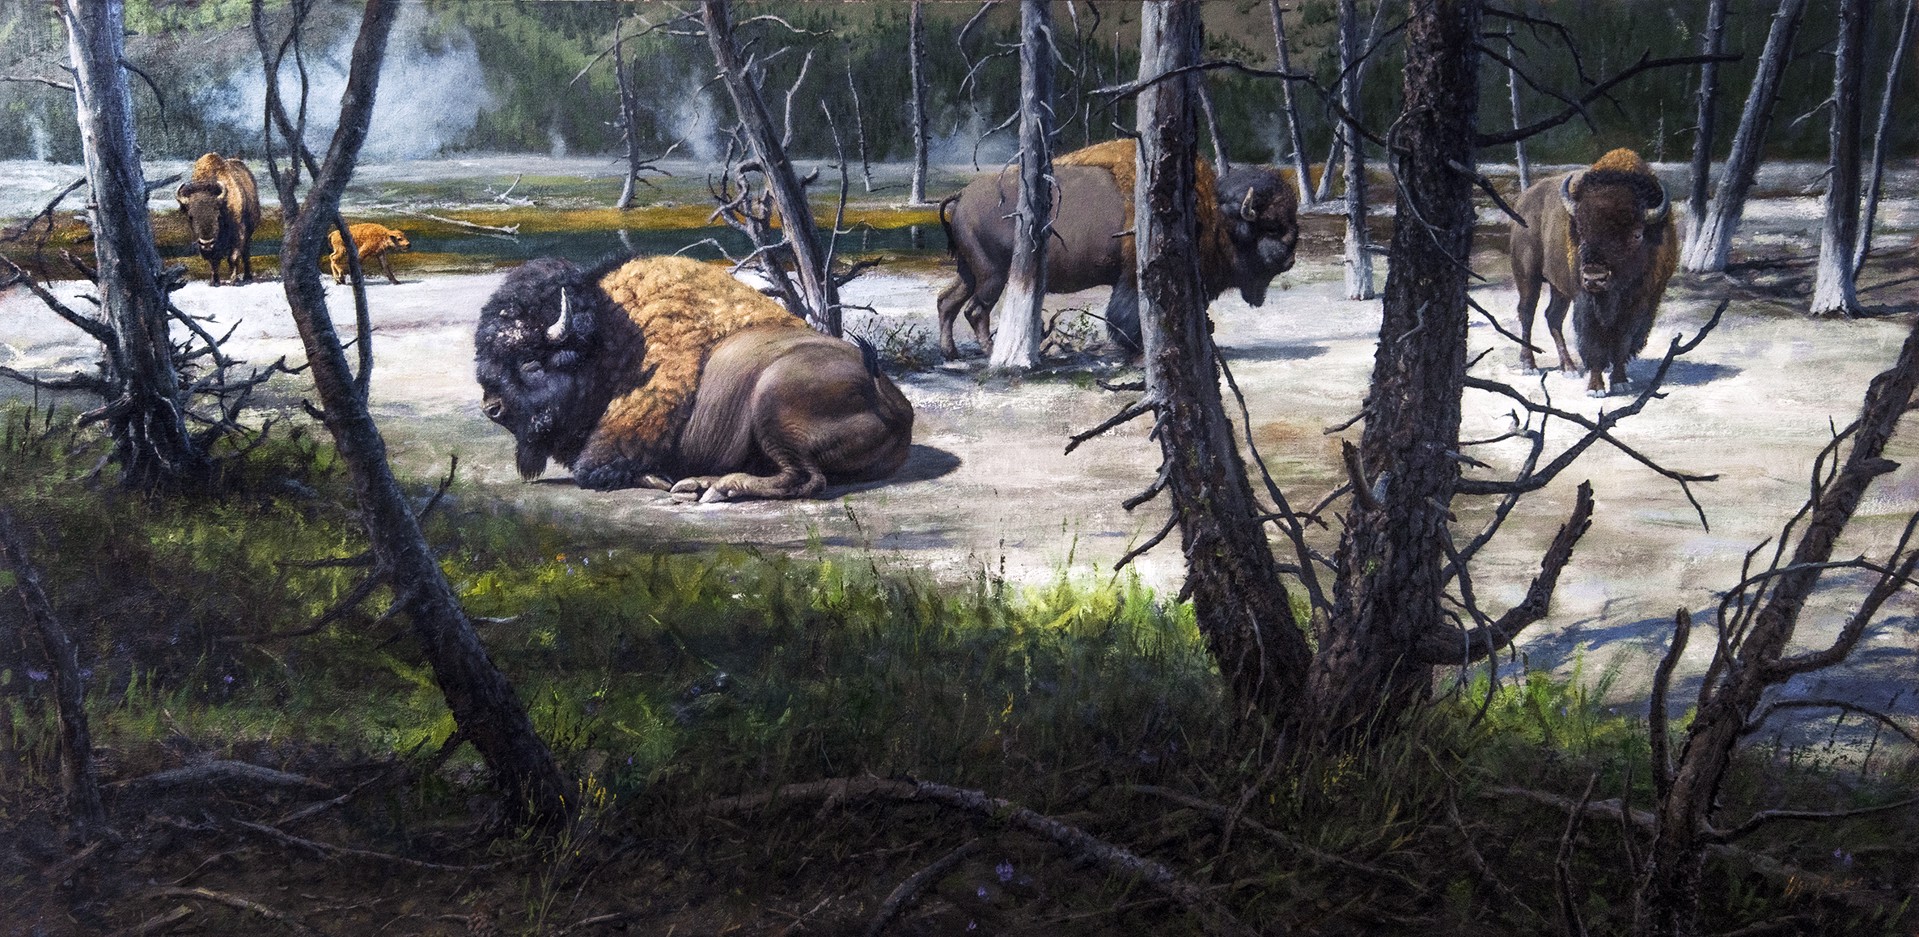 At Rest in Yellowstone by Oscar Campos